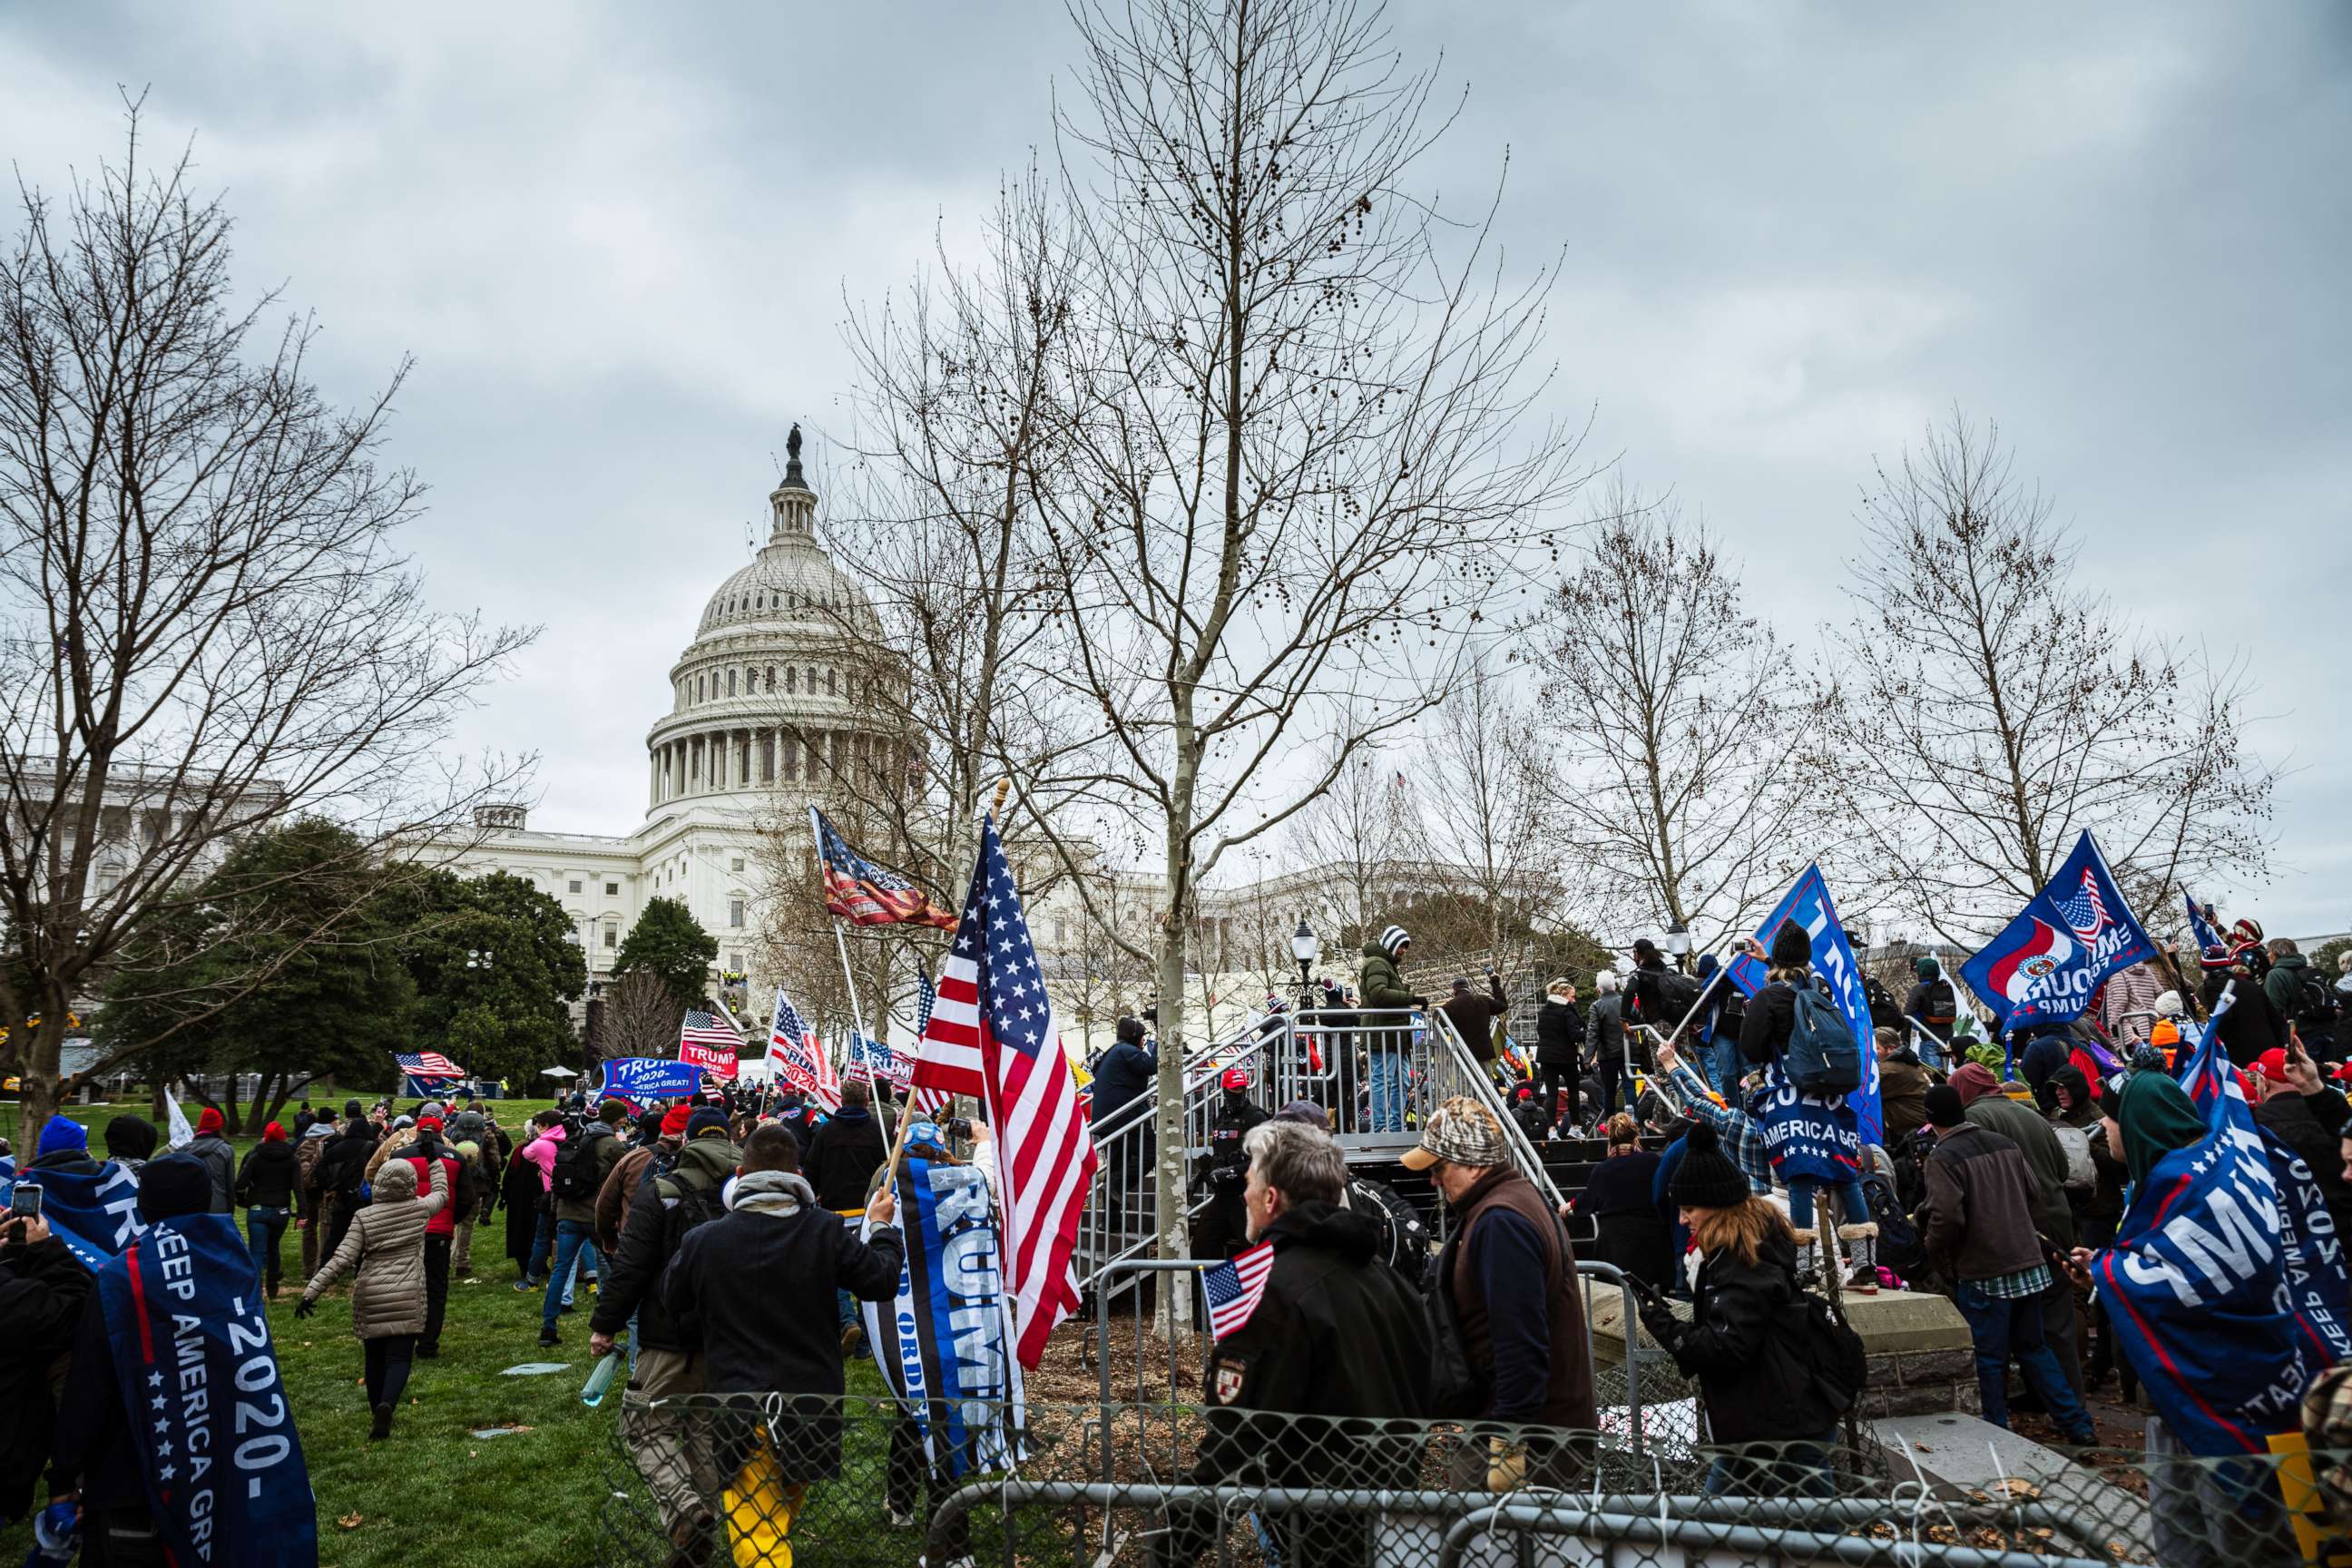 PHOTO: A large group of pro-Trump protesters overtake police and barriers in order to access the Capitol Building on January 6, 2021 in Washington, DC.